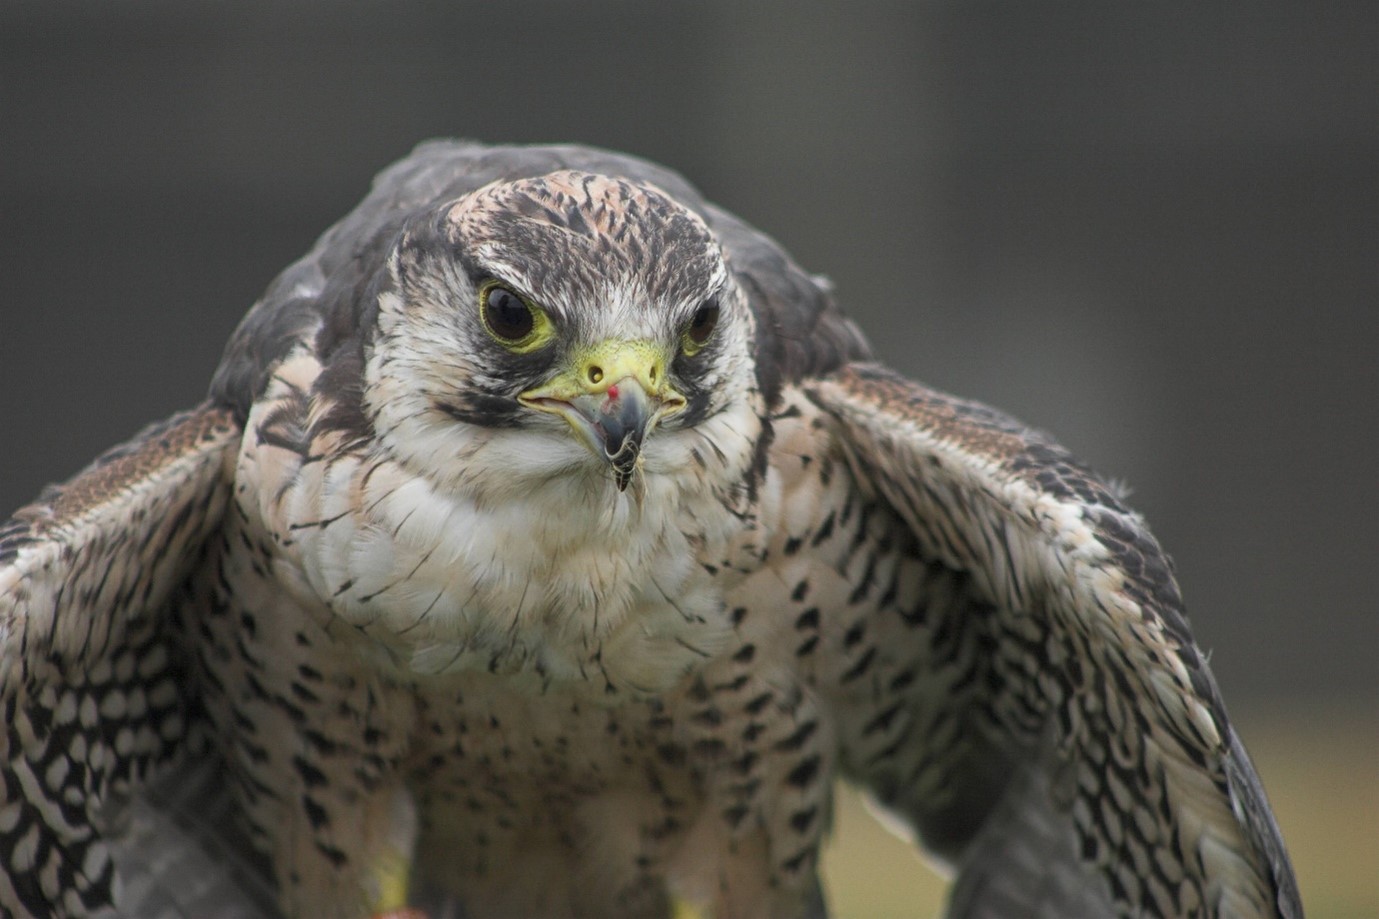 A soaring success: peregrine falcons thrive at our New Milton water tower